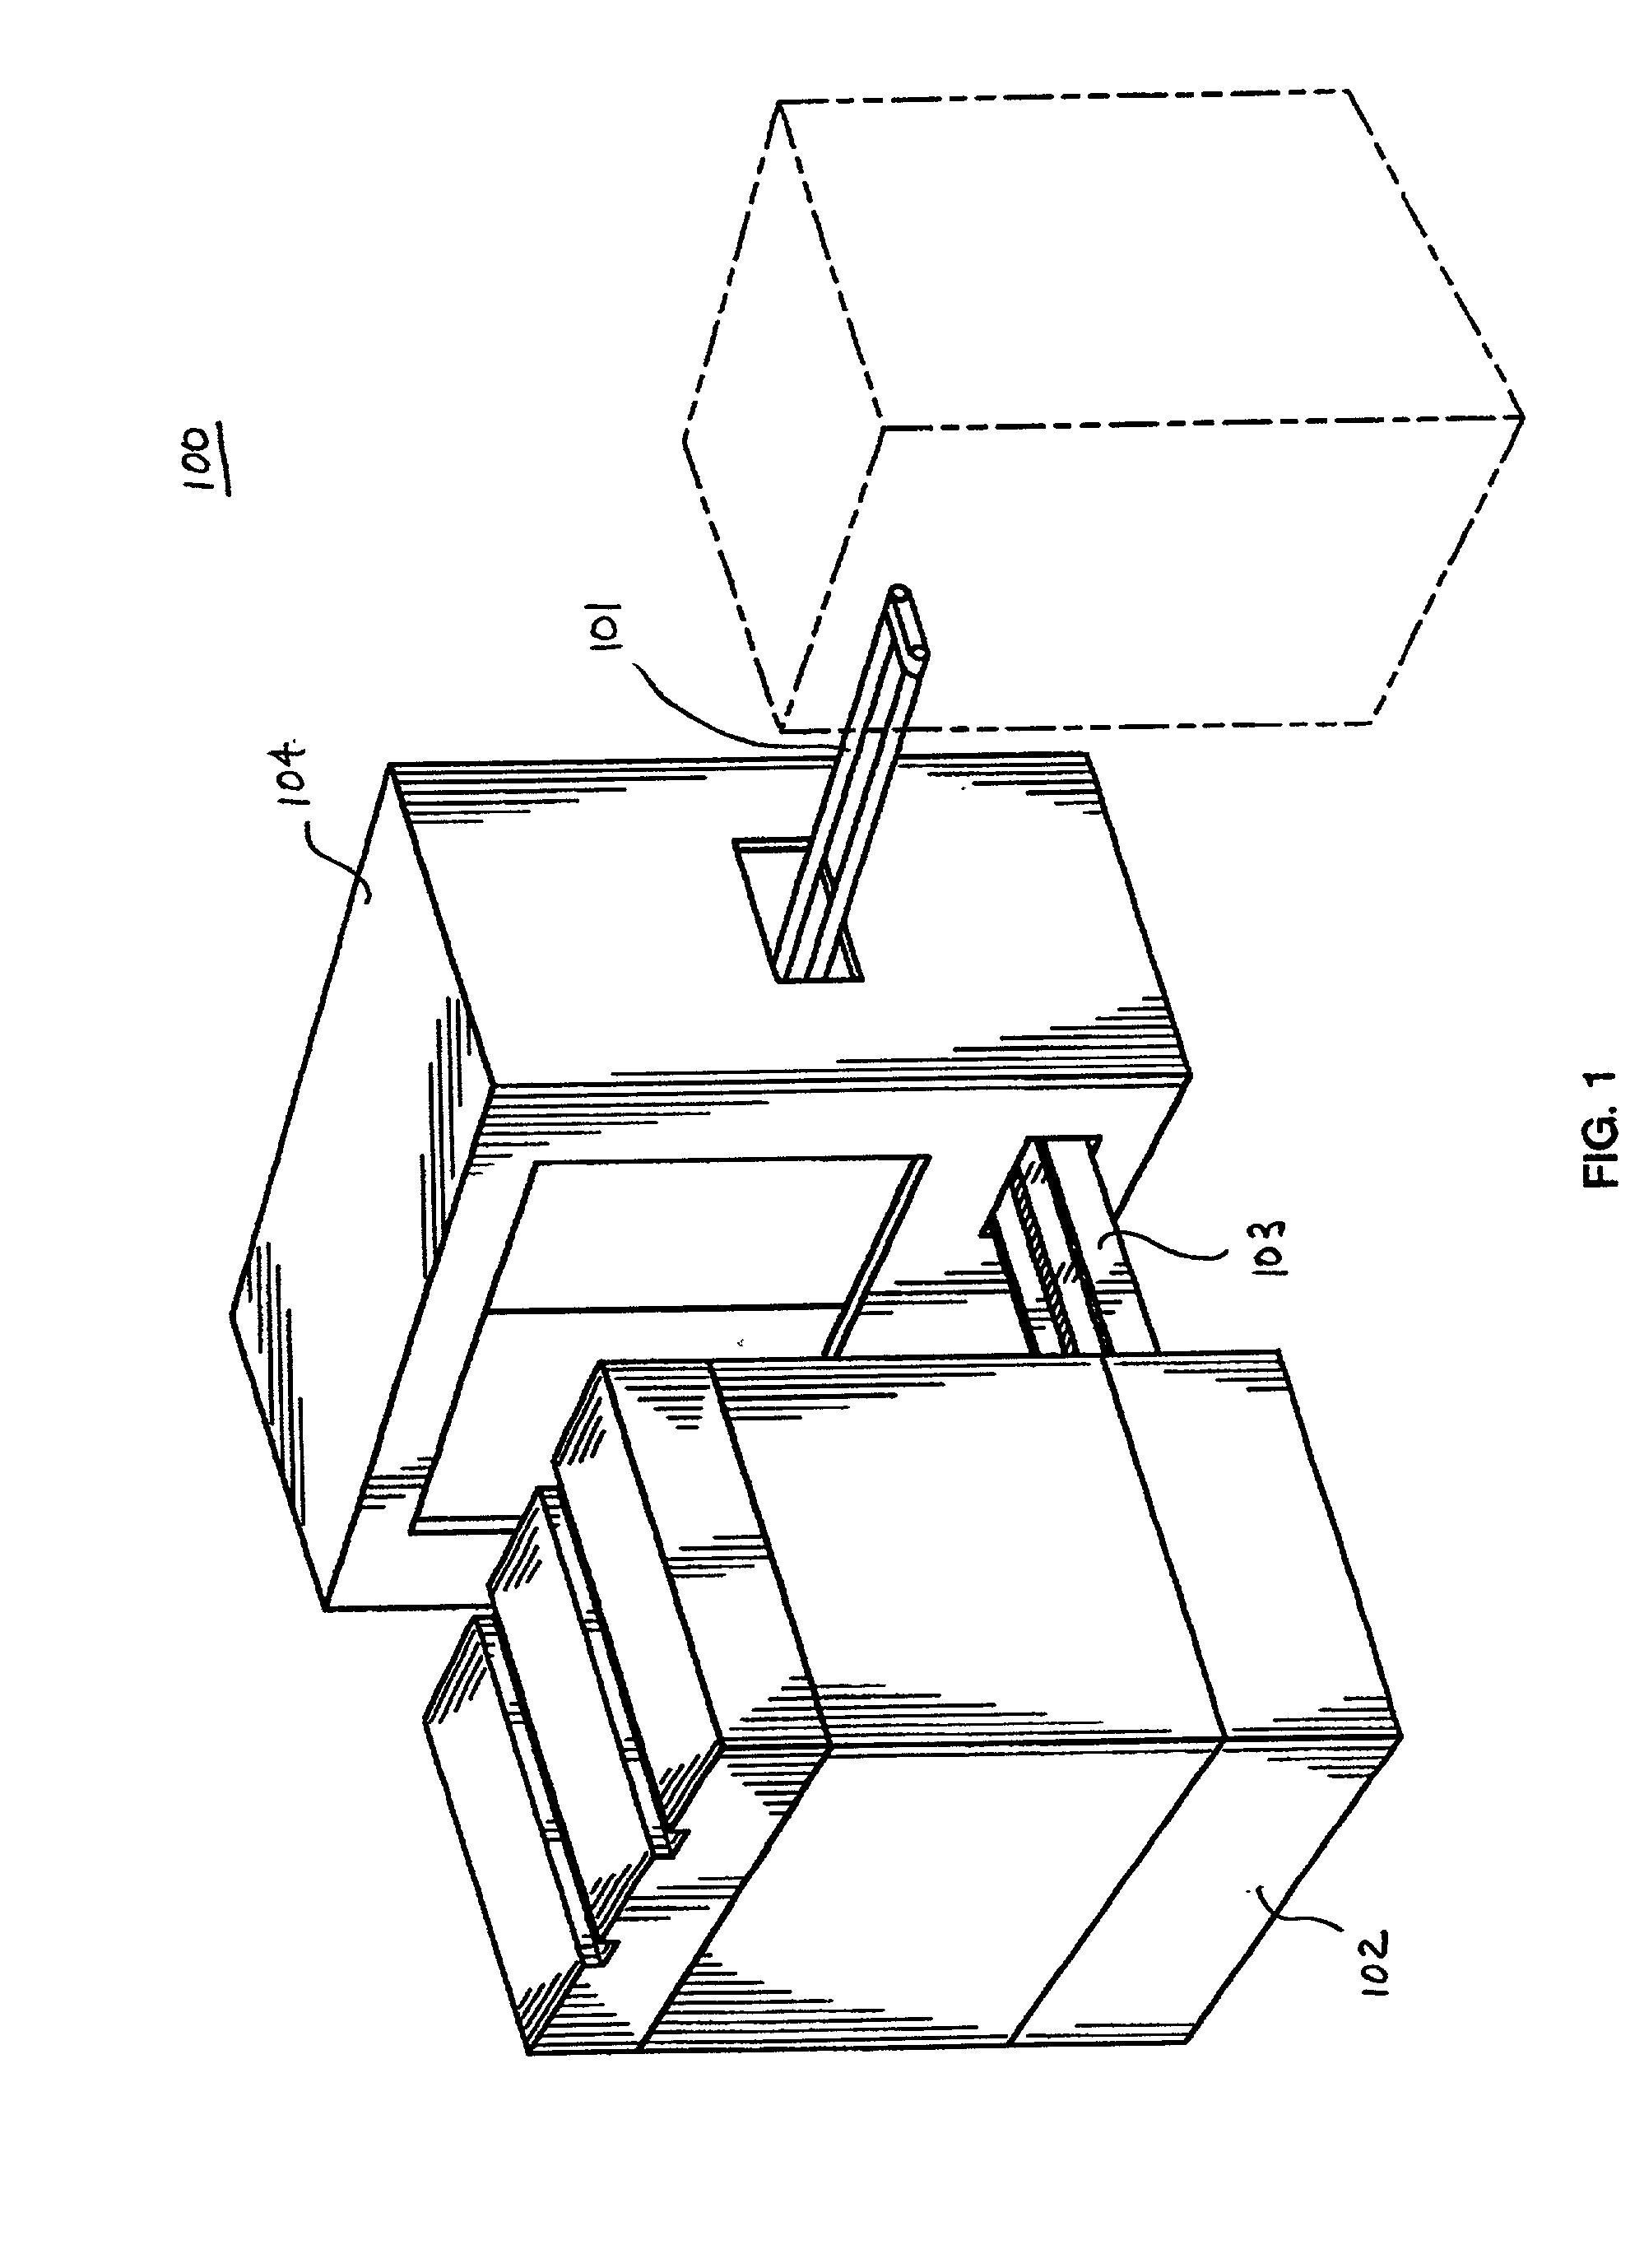 Random access storage and retrieval system for microplates, microplate transport and micorplate conveyor